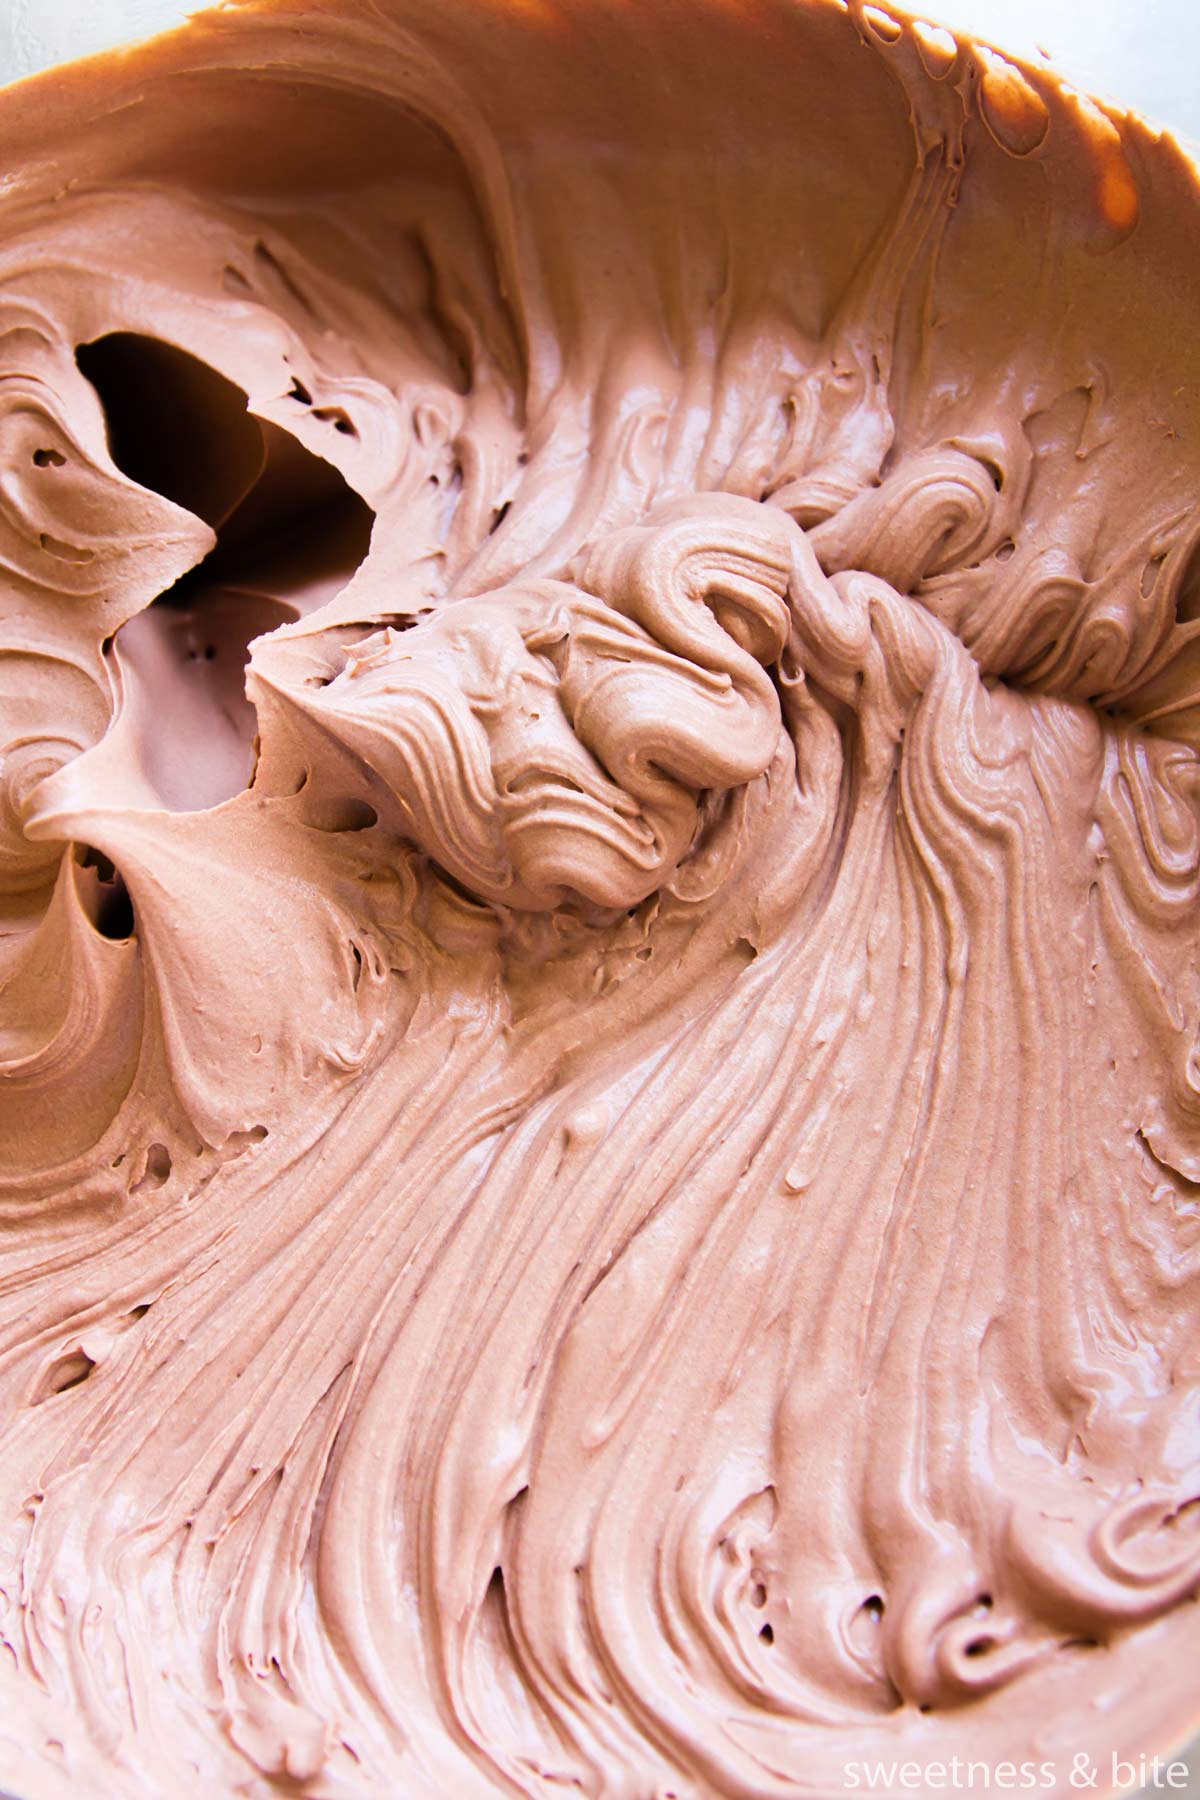 Whipped mousse in a bowl.